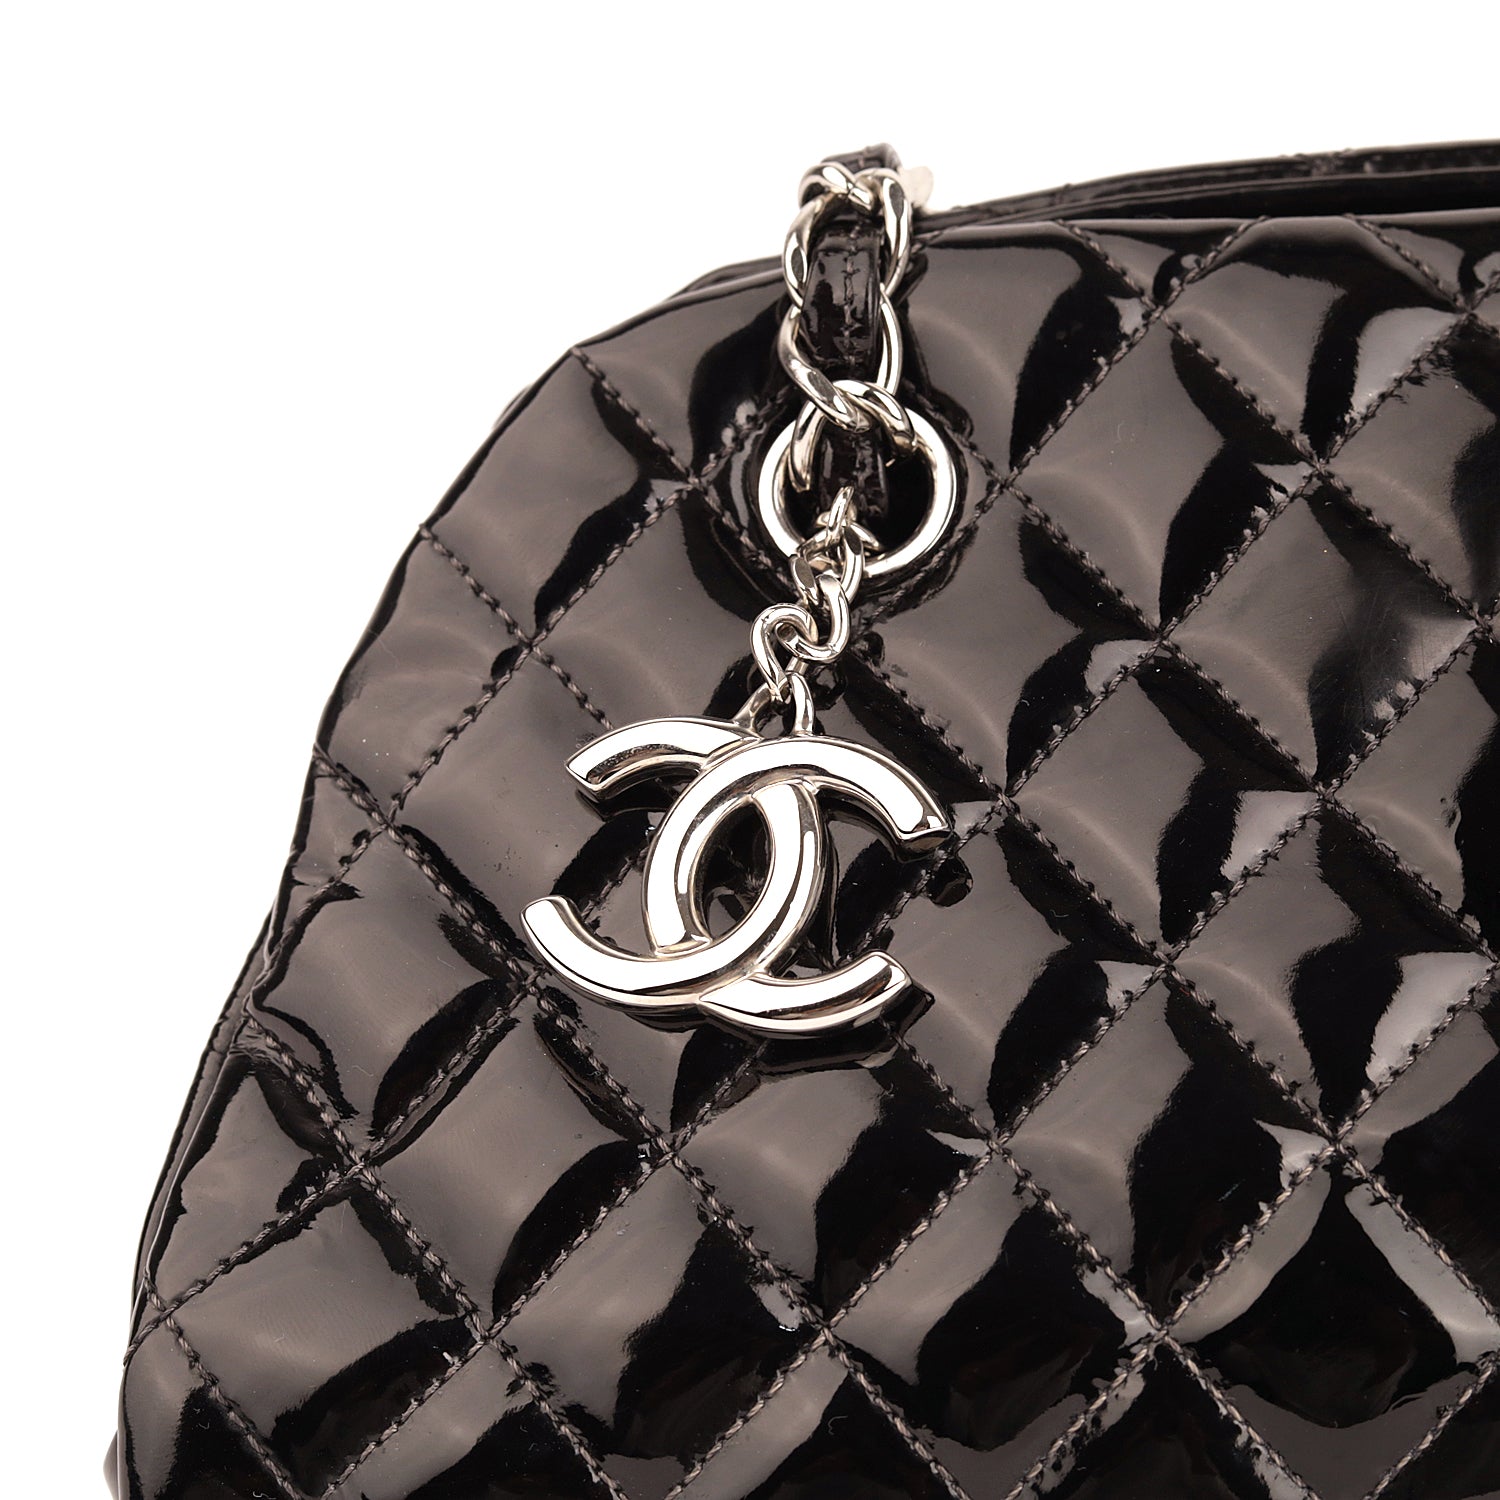 Chanel Patent Mademoiselle Bowling Bag Degrade